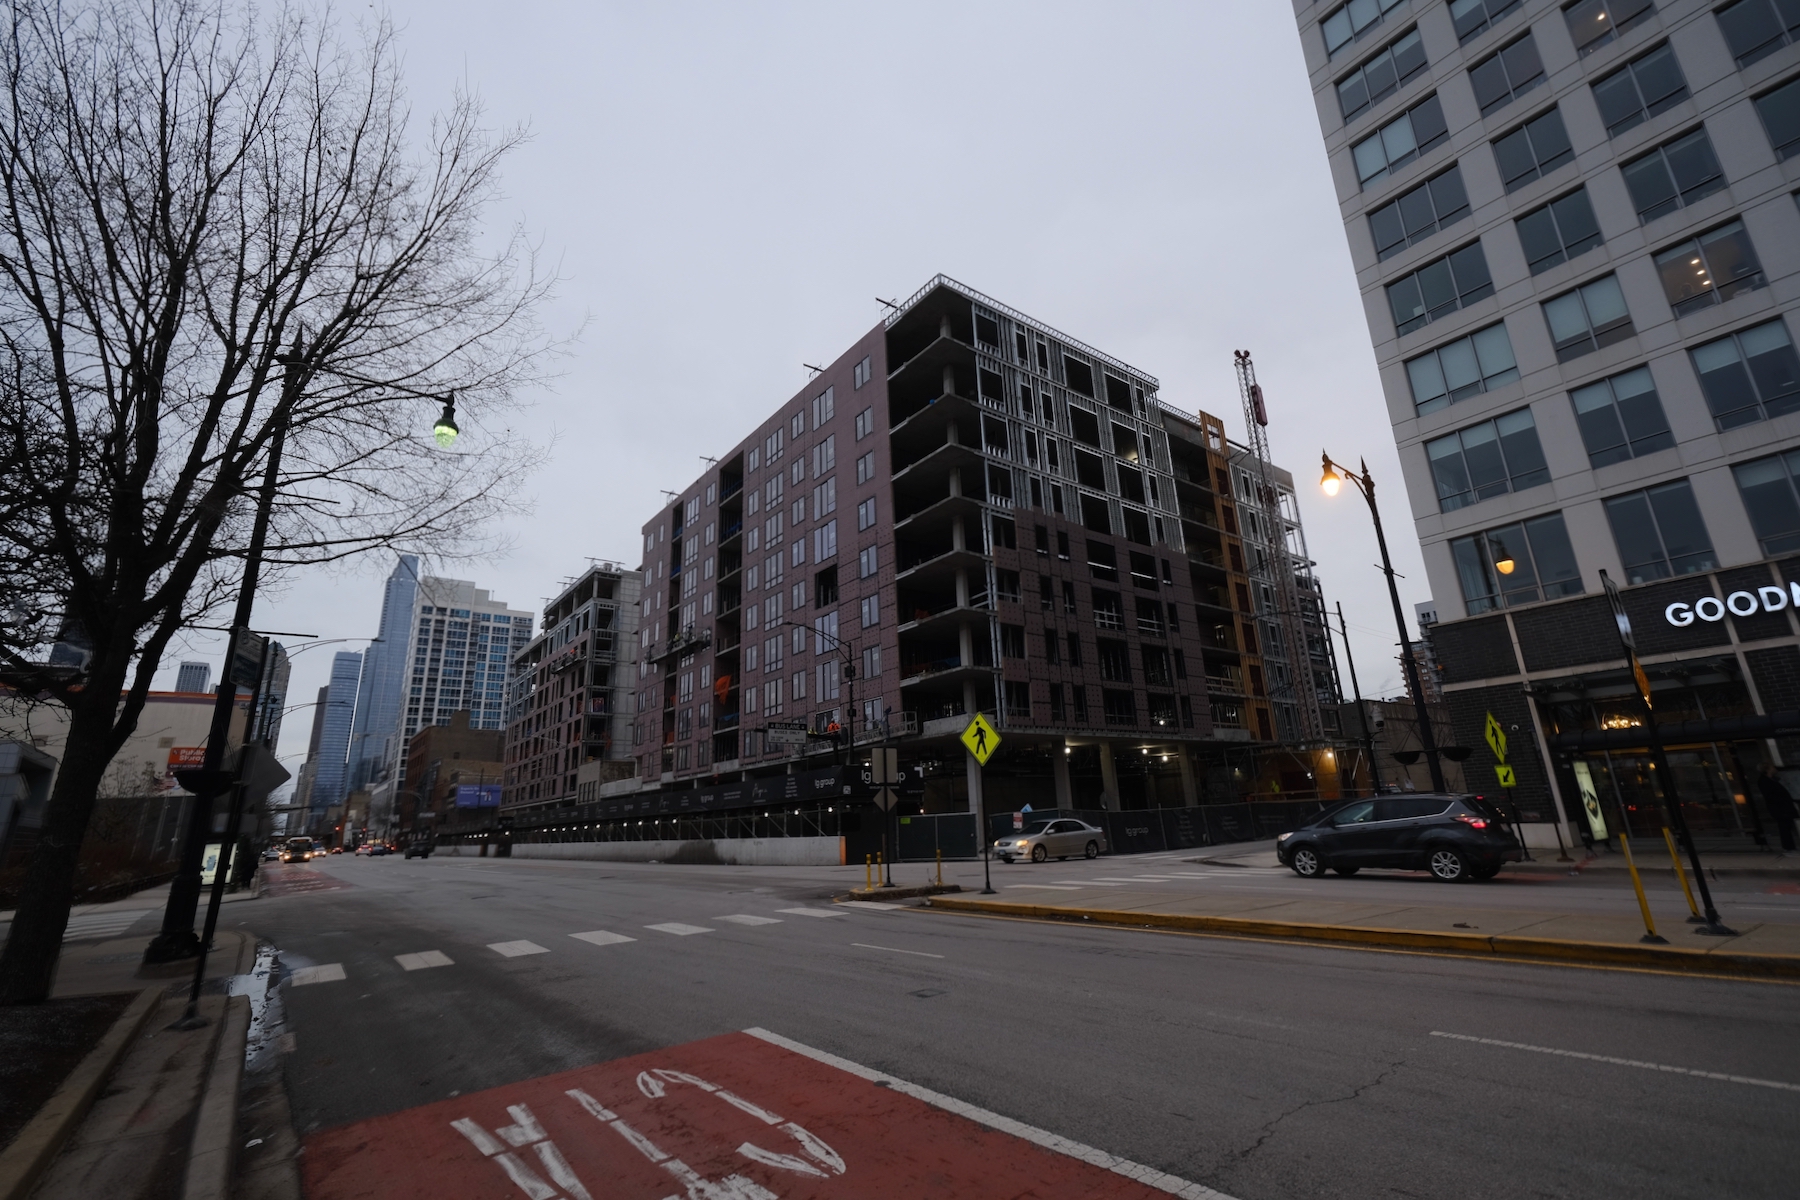 411 W Chicago Avenue (left) and 751 N Hudson Avenue (right)